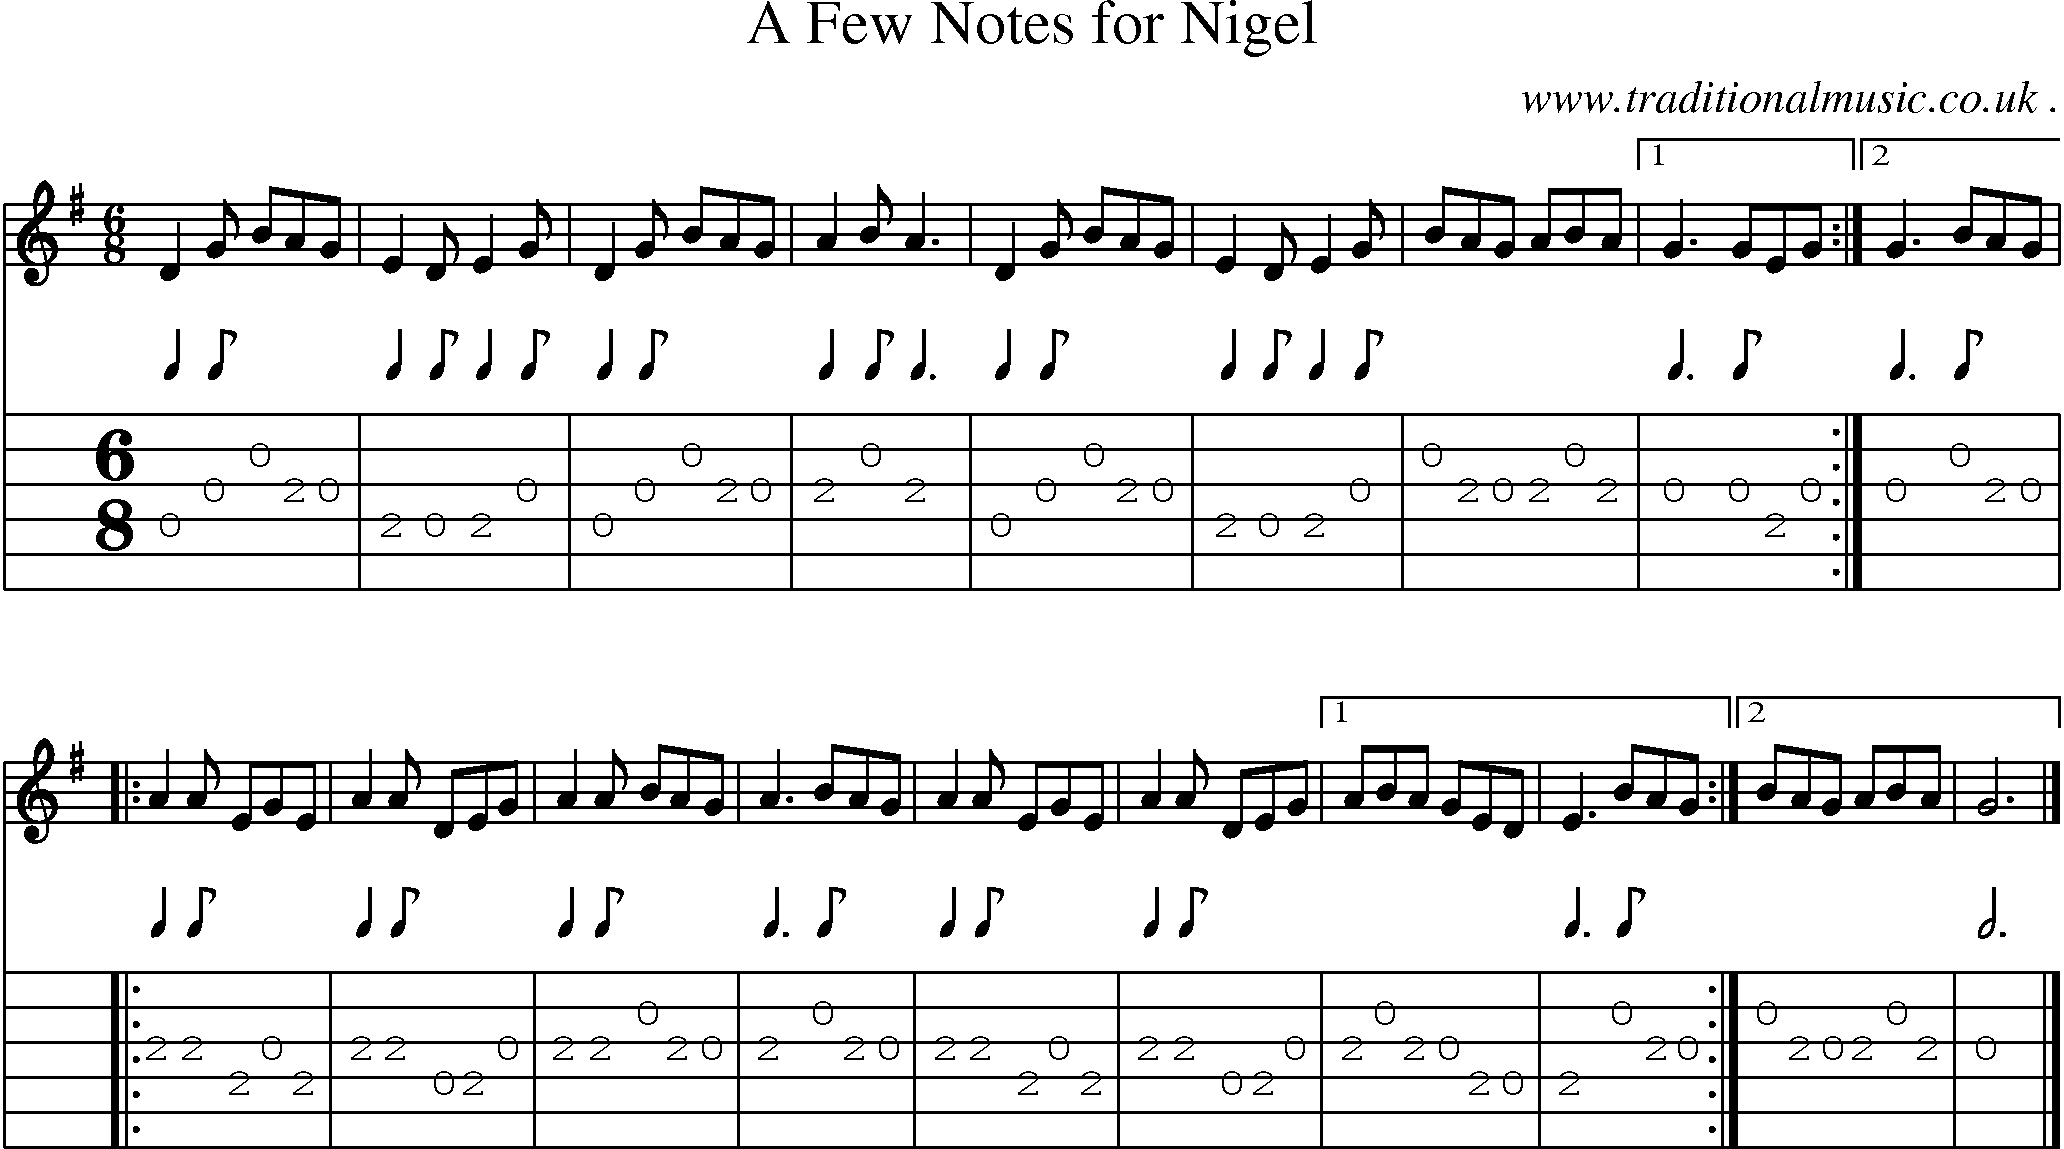 Sheet-music  score, Chords and Guitar Tabs for A Few Notes For Nigel